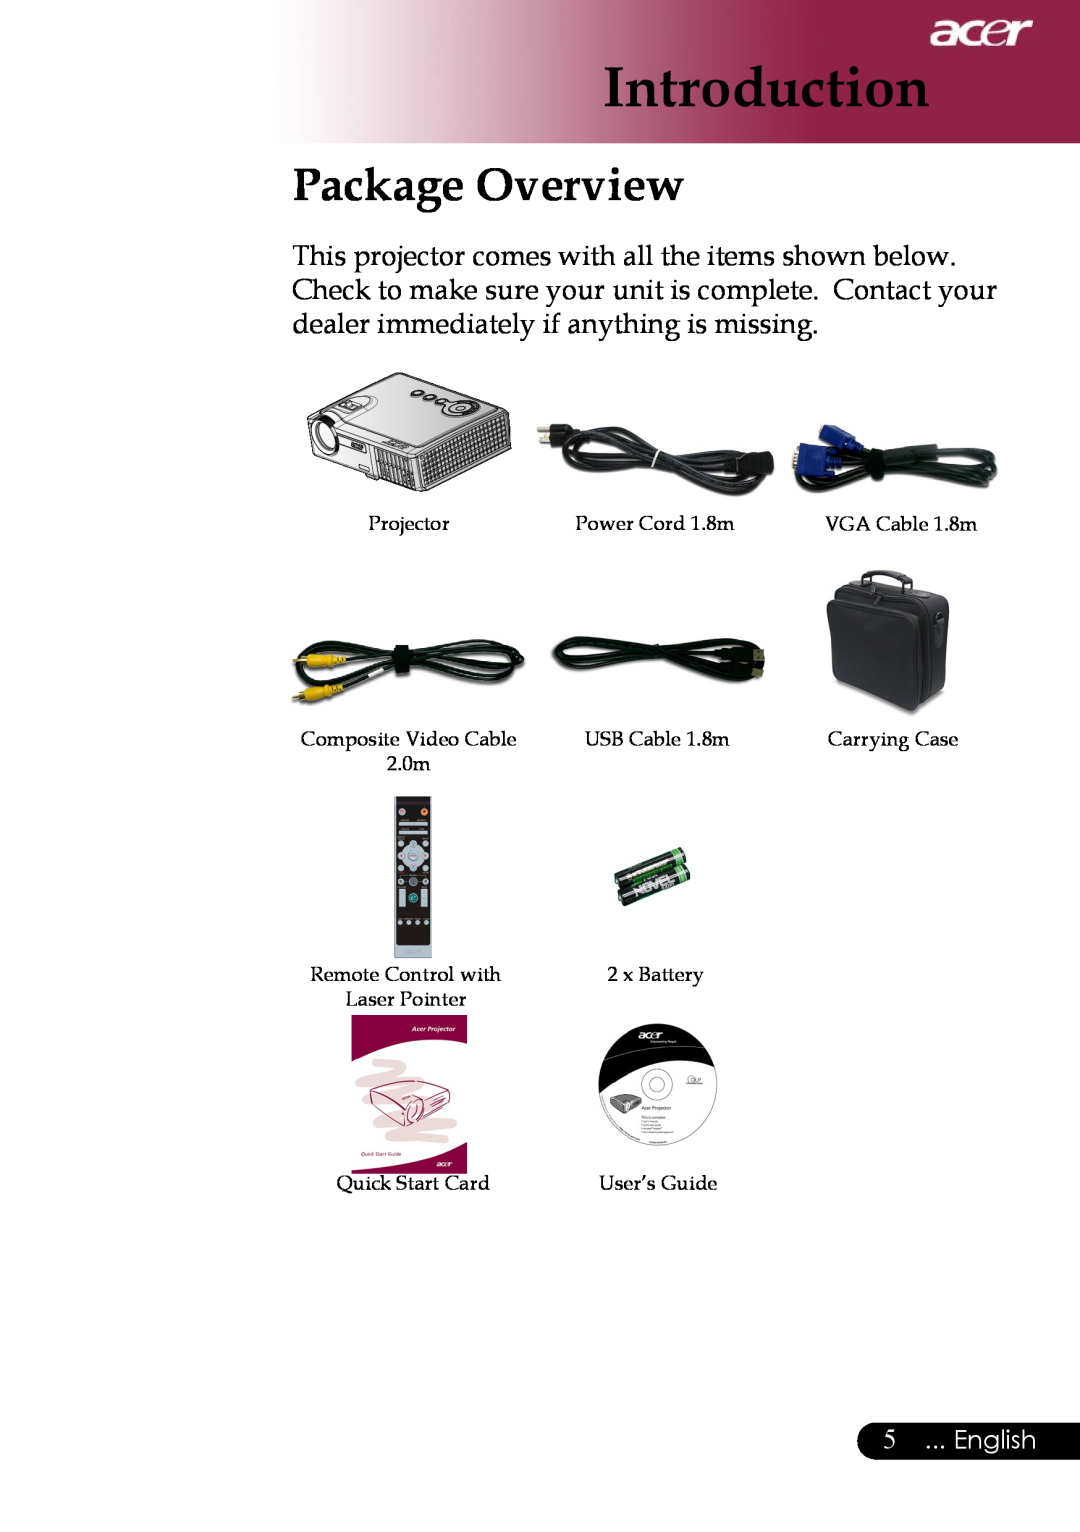 Acer PD311 Package Overview, English, Introduction, Projector, Power Cord 1.8m, Composite Video Cable, USB Cable 1.8m 